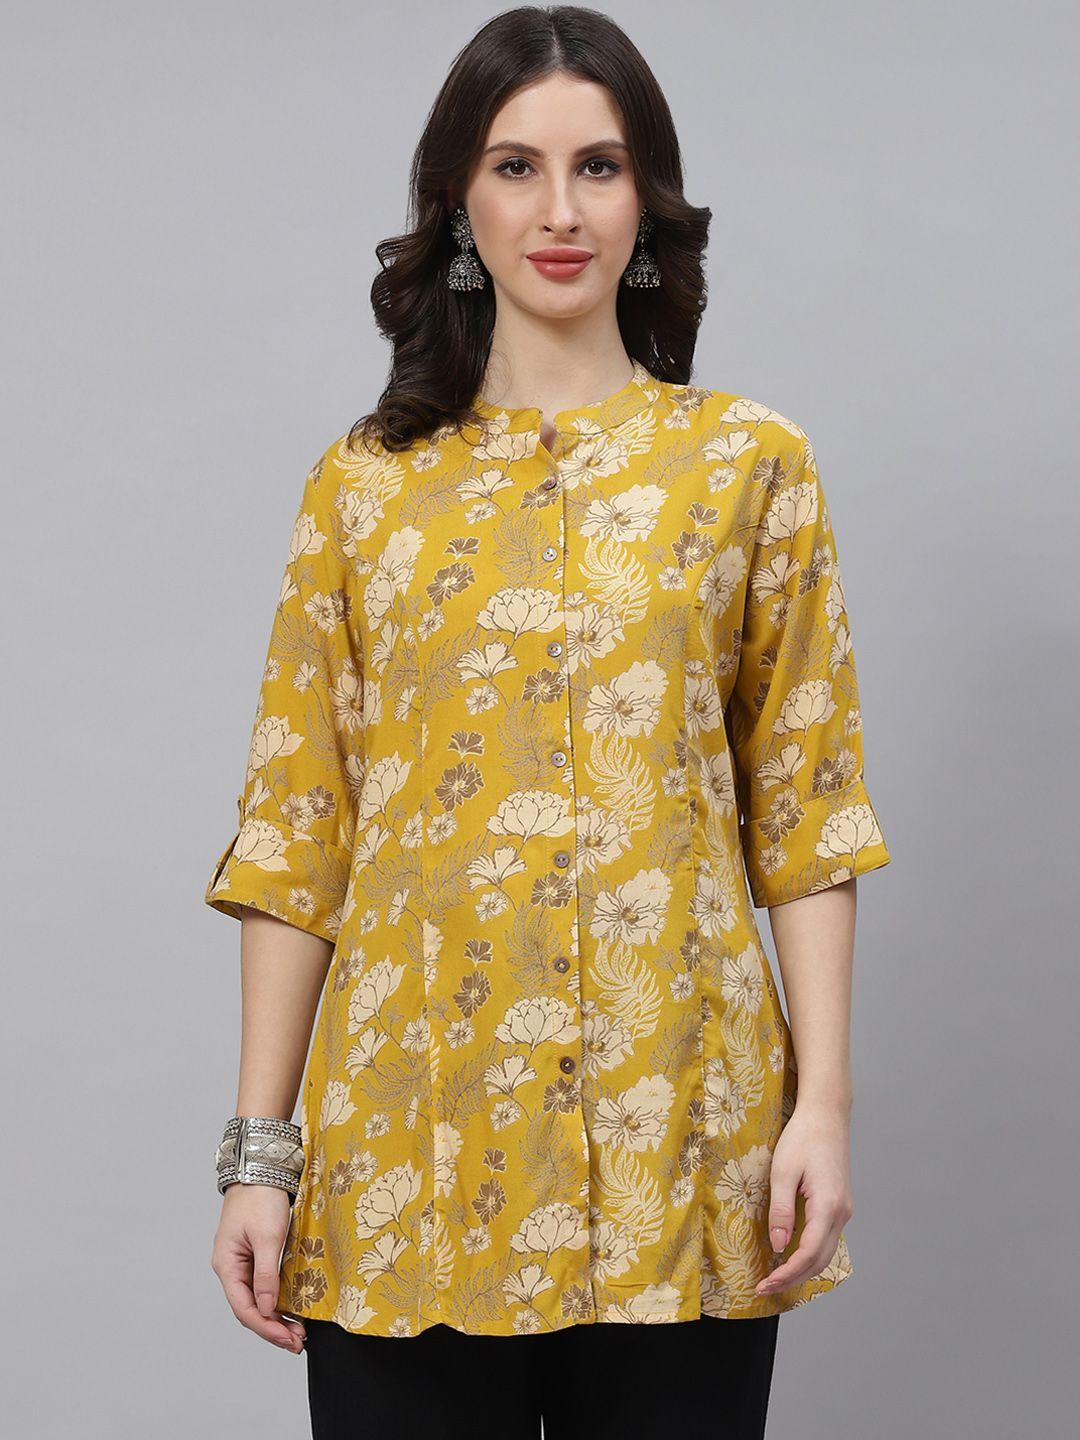 divena mustard yellow & beige floral print roll-up sleeves shirt style top